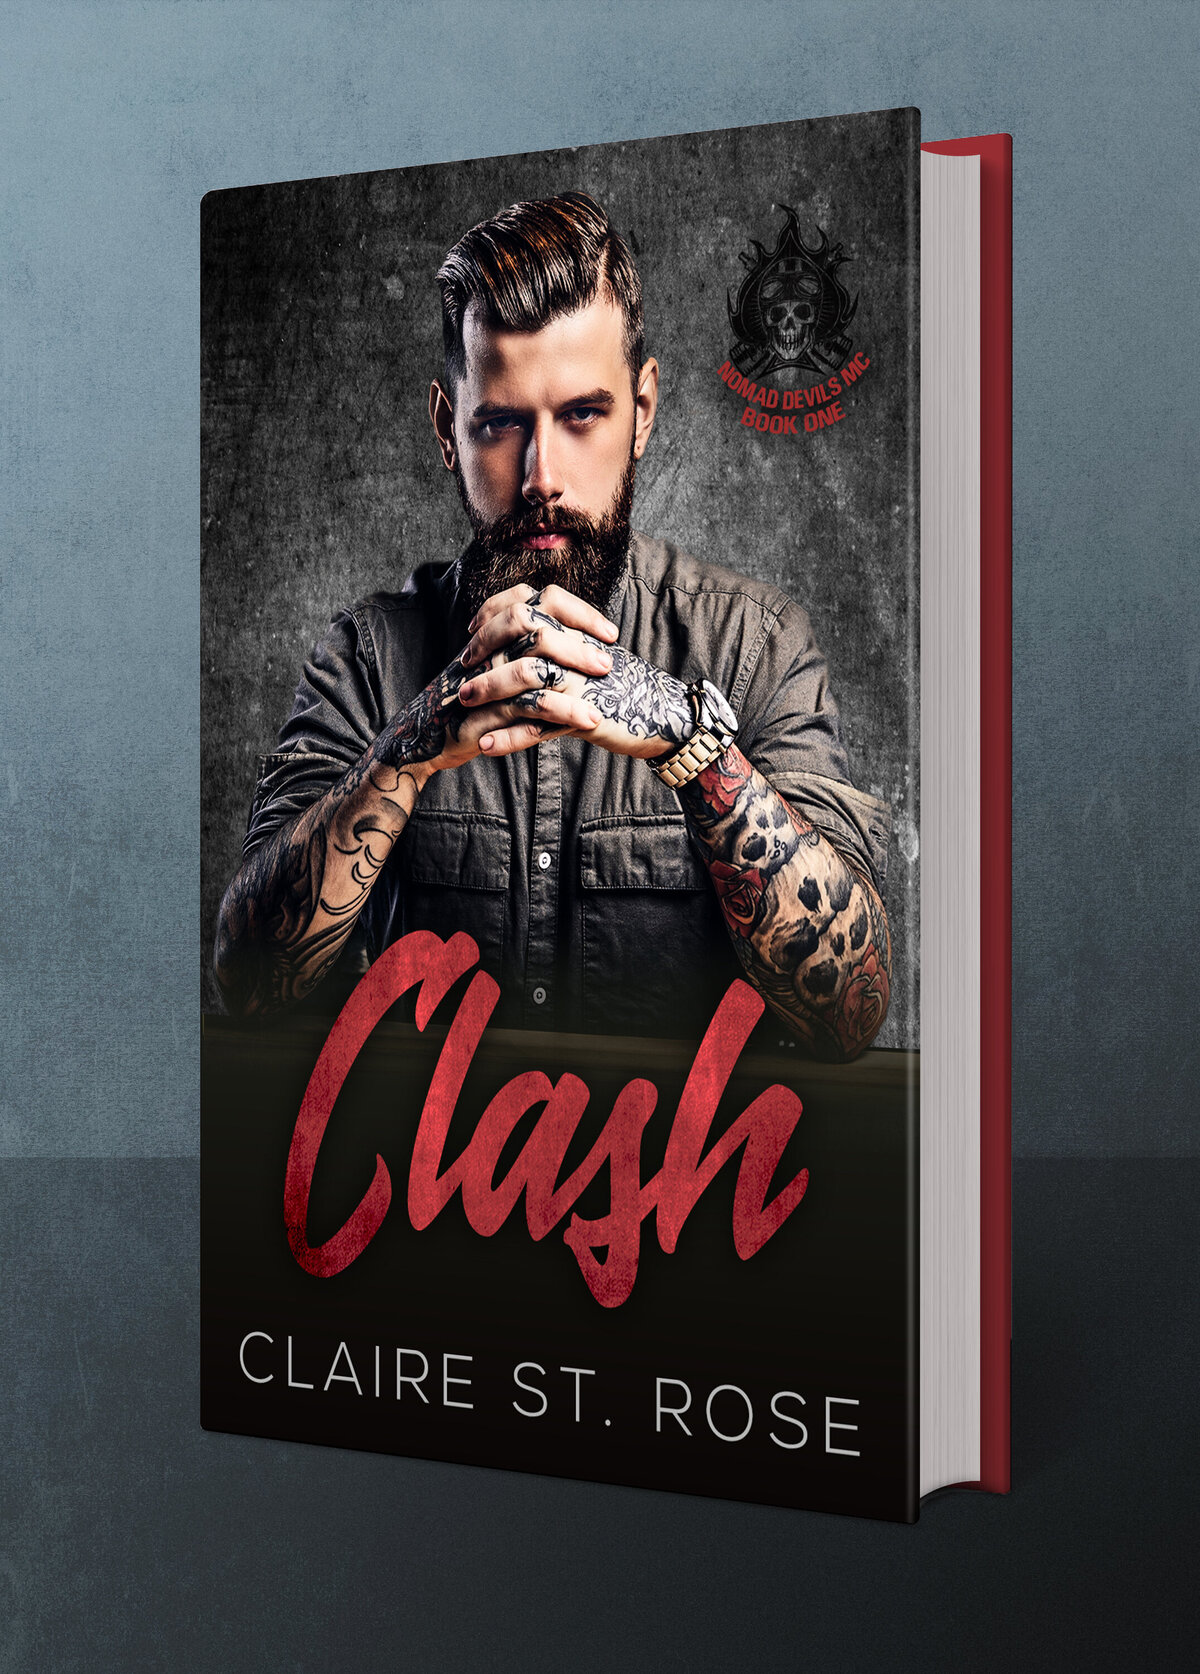 Clash by Claire St. Rose